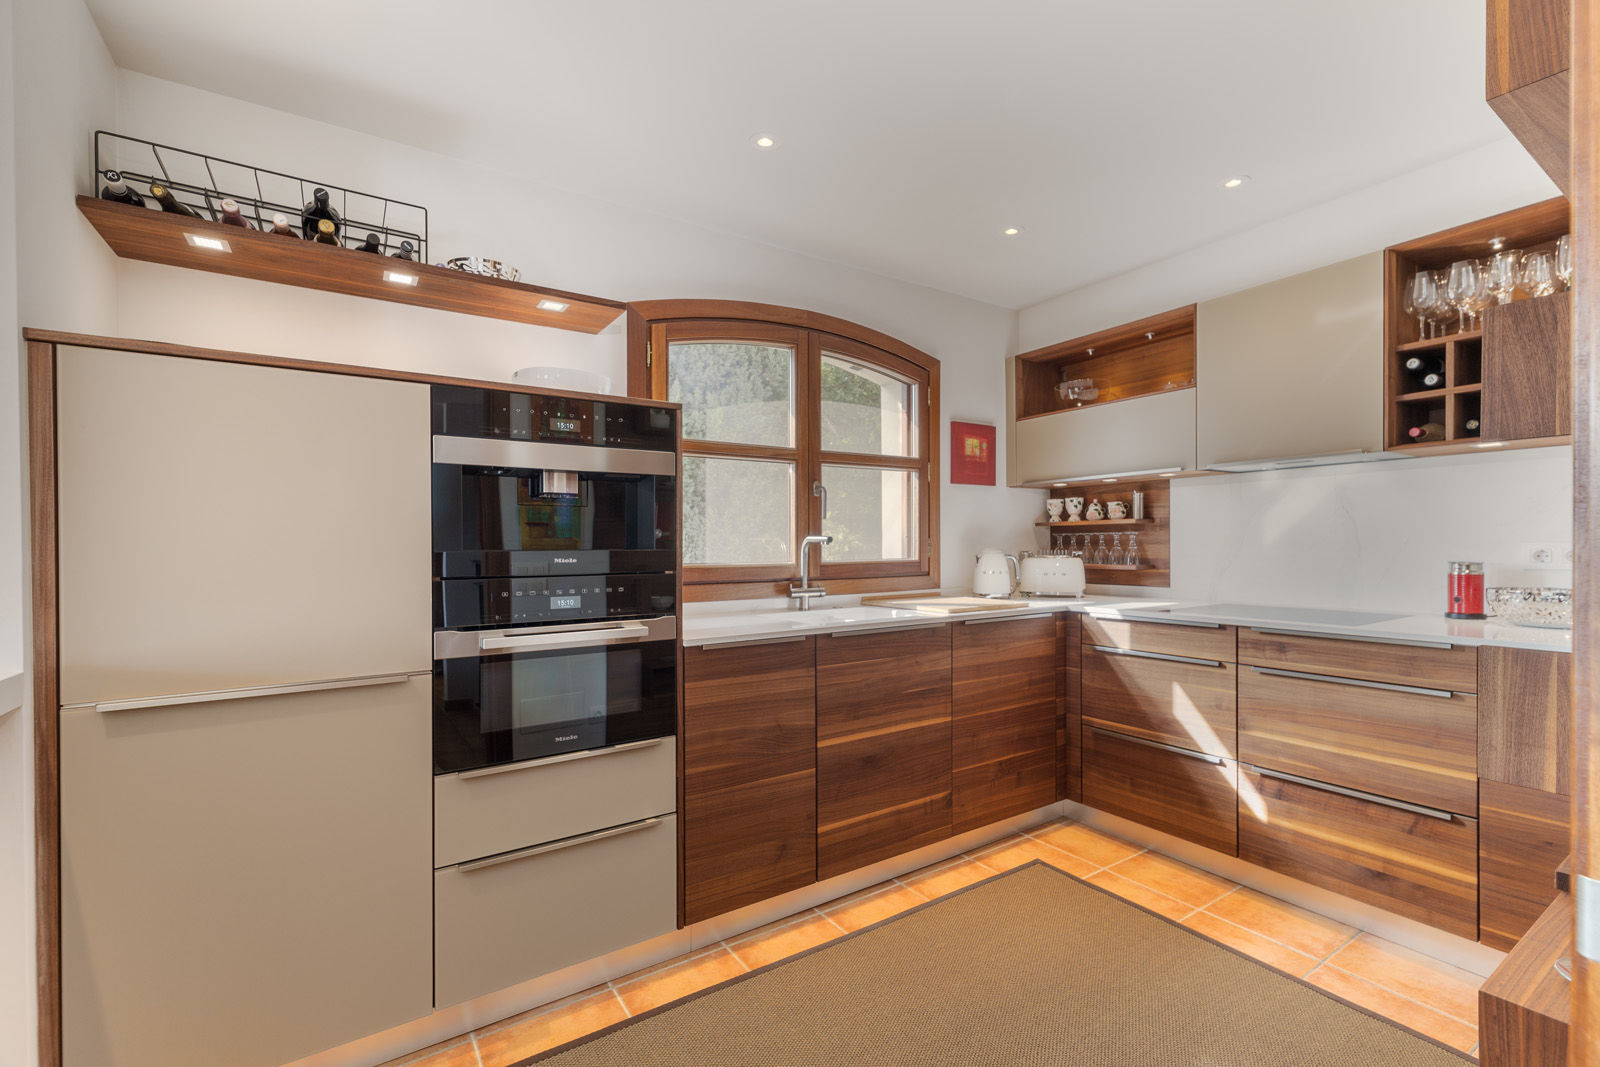 High quality fitted kitchen